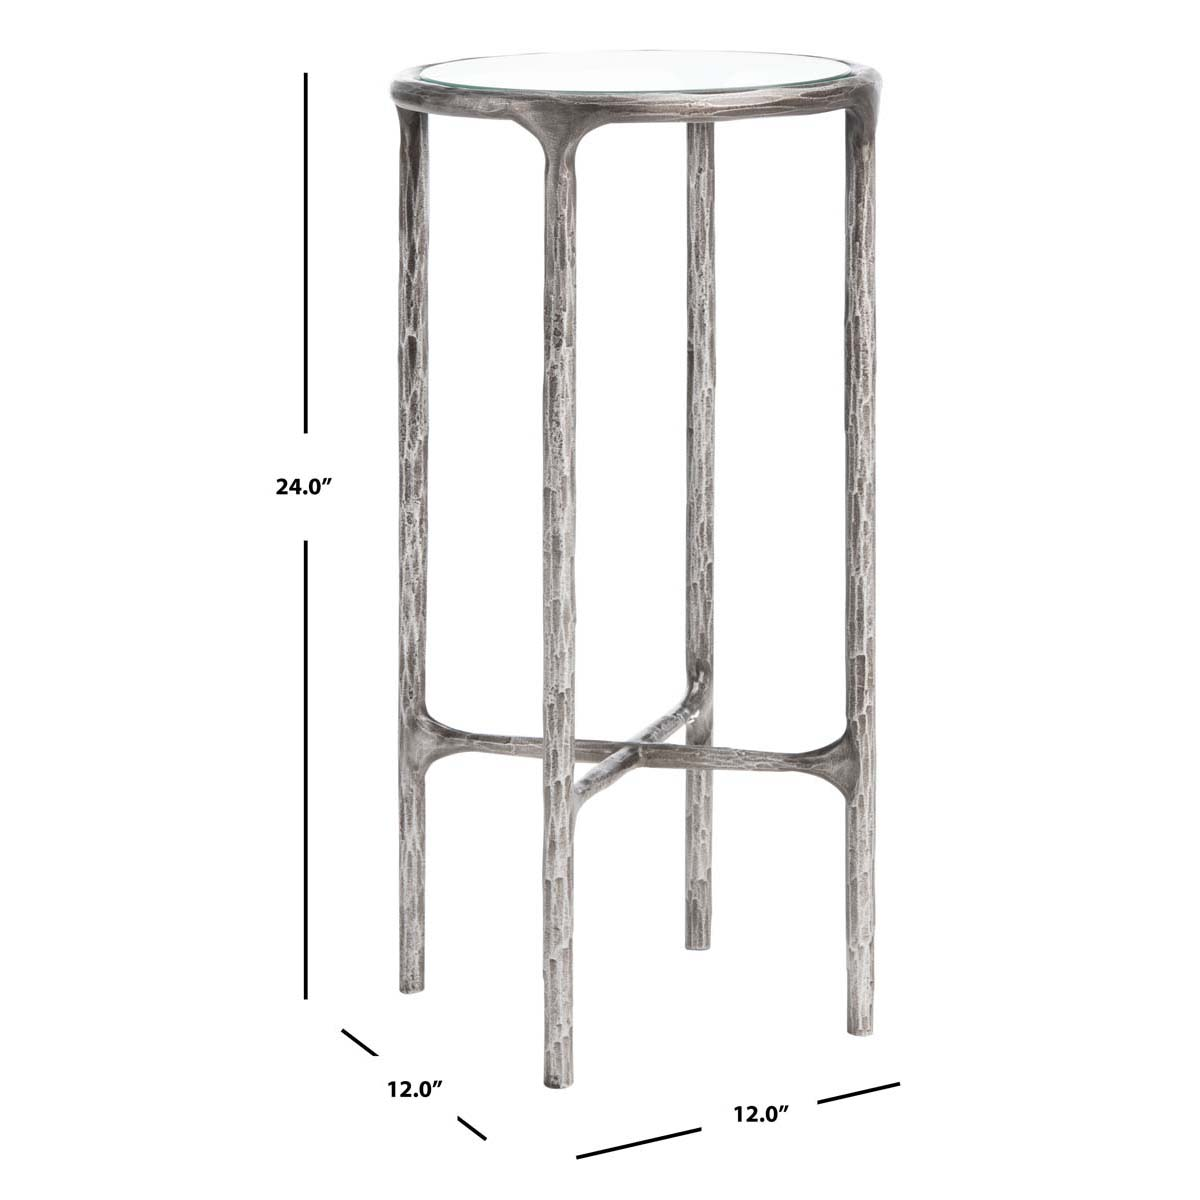 Safavieh Couture Jessa Forged Metal Tall Round End Table - Silver